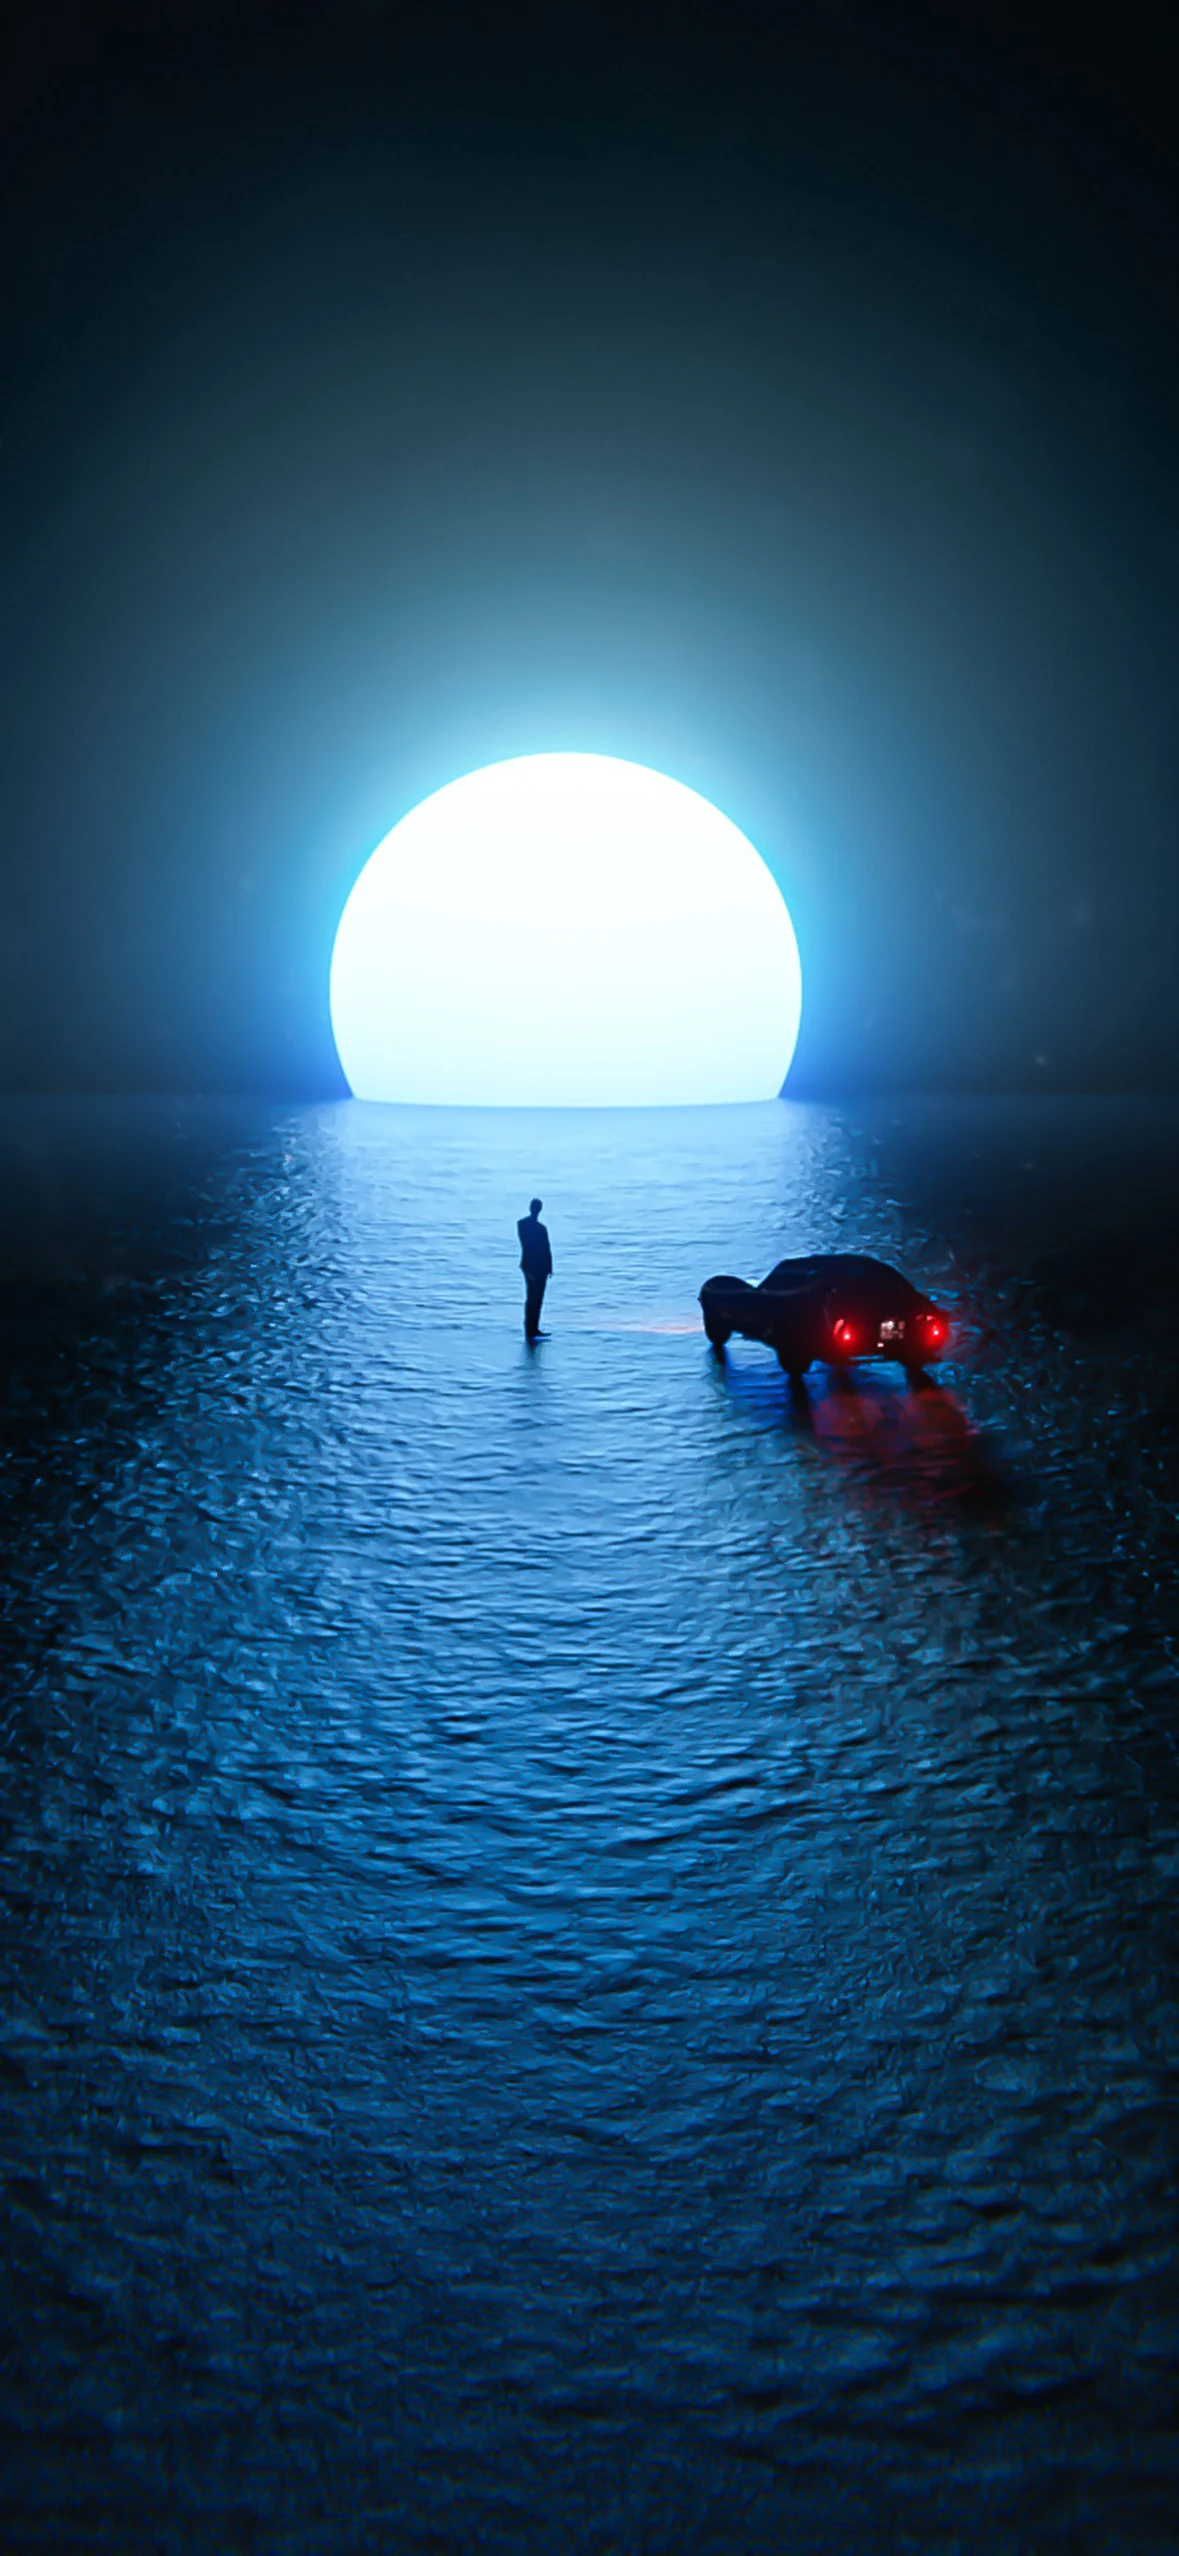 A surreal iPhone wallpaper depicting a lone figure and a vintage car bathed in the glow of an enormous moon rising on the horizon over a calm sea.